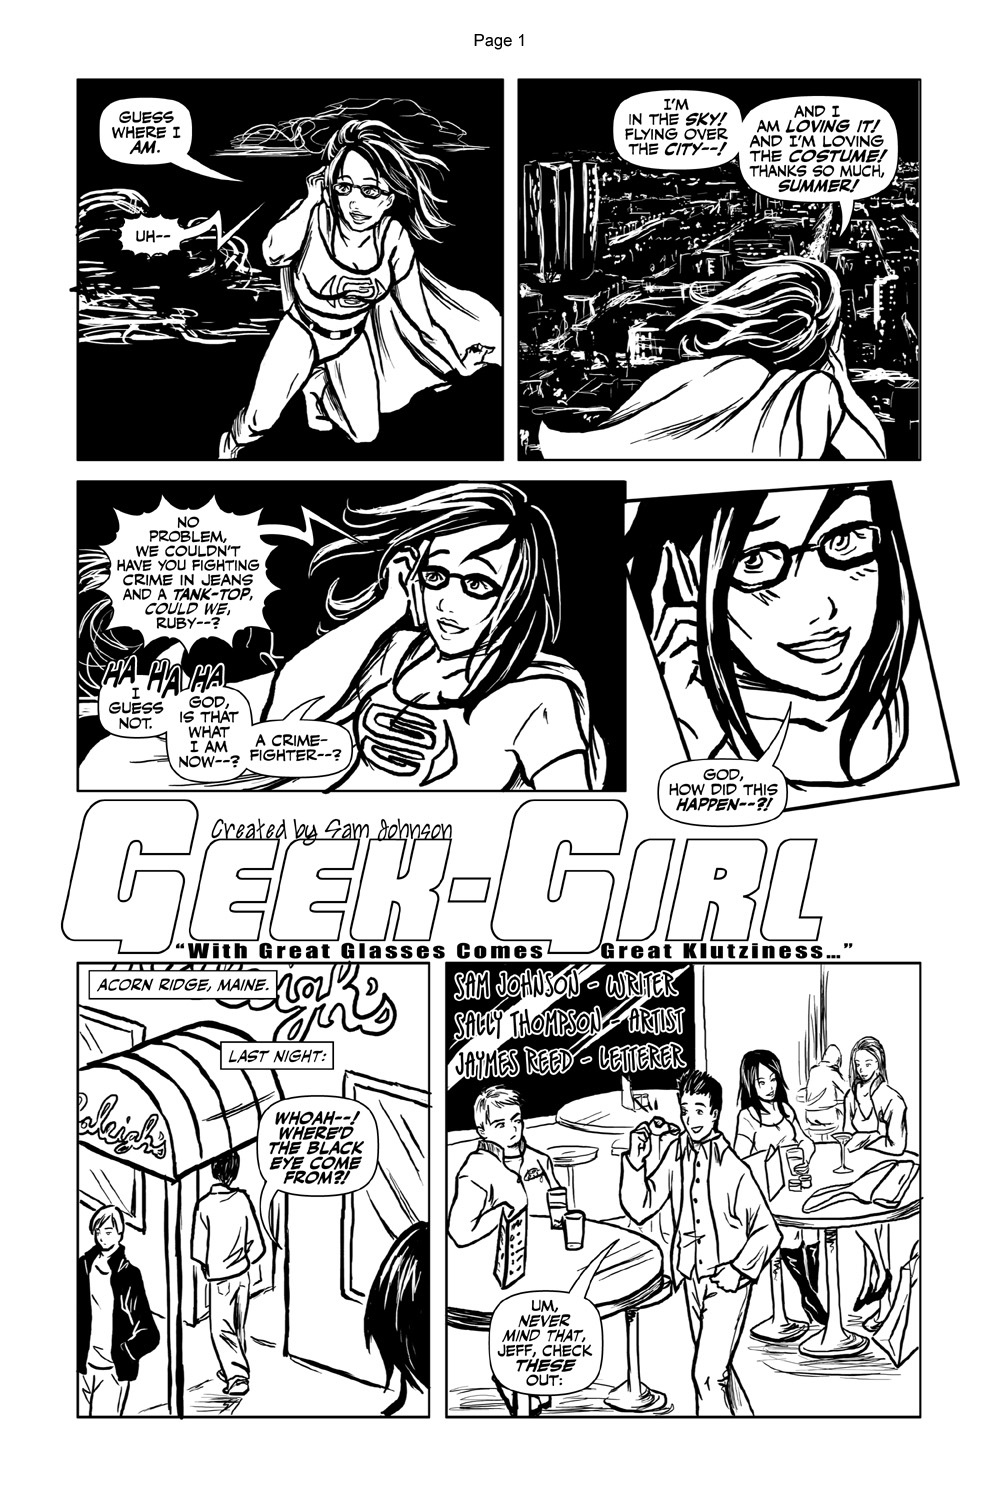 Geek-Girl #0 Preview Page 1